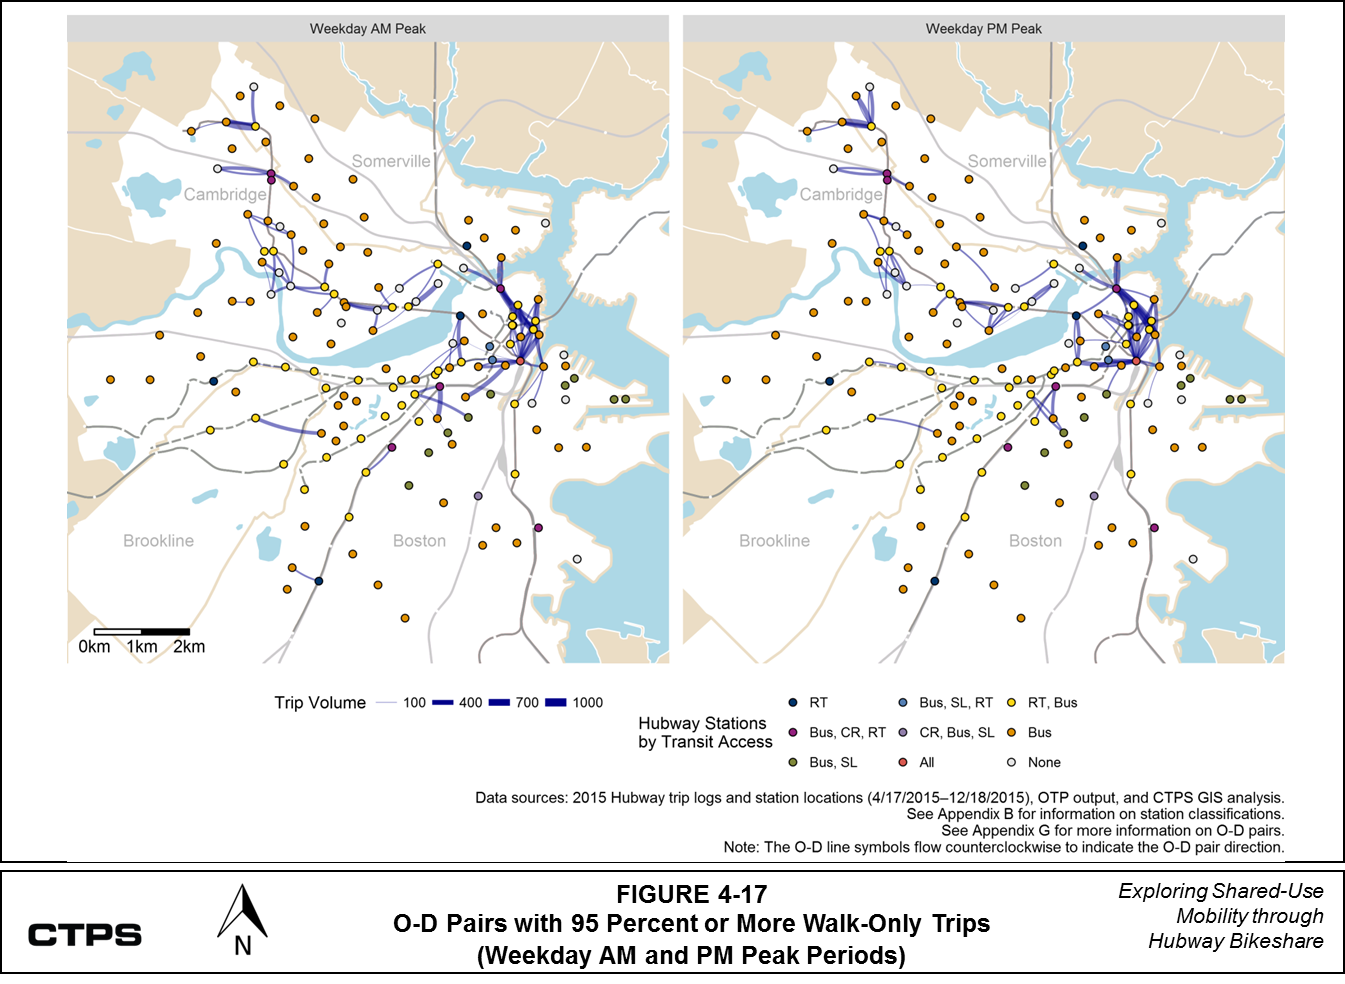 FIGURE 4-17: O-D Pairs with 95 Percent or More Walk-Only Trips (Weekday AM and PM Peak Periods): This series of two maps shows origin-destination (O-D) pairs of Hubway member trips. One map shows O-D pairs during the weekday AM peak period, and the other shows O-D pairs during the weekday PM peak period. These O-D pairs are classified according to their trip volume. At least 95 percent of the trips in these pairs had “walk-only” travel itineraries generated by Open Trip Planner (OTP). More information about these O-D pairs is available in Appendix G. The maps also classify Hubway stations by the transit modes that are accessible within 200 meters. 